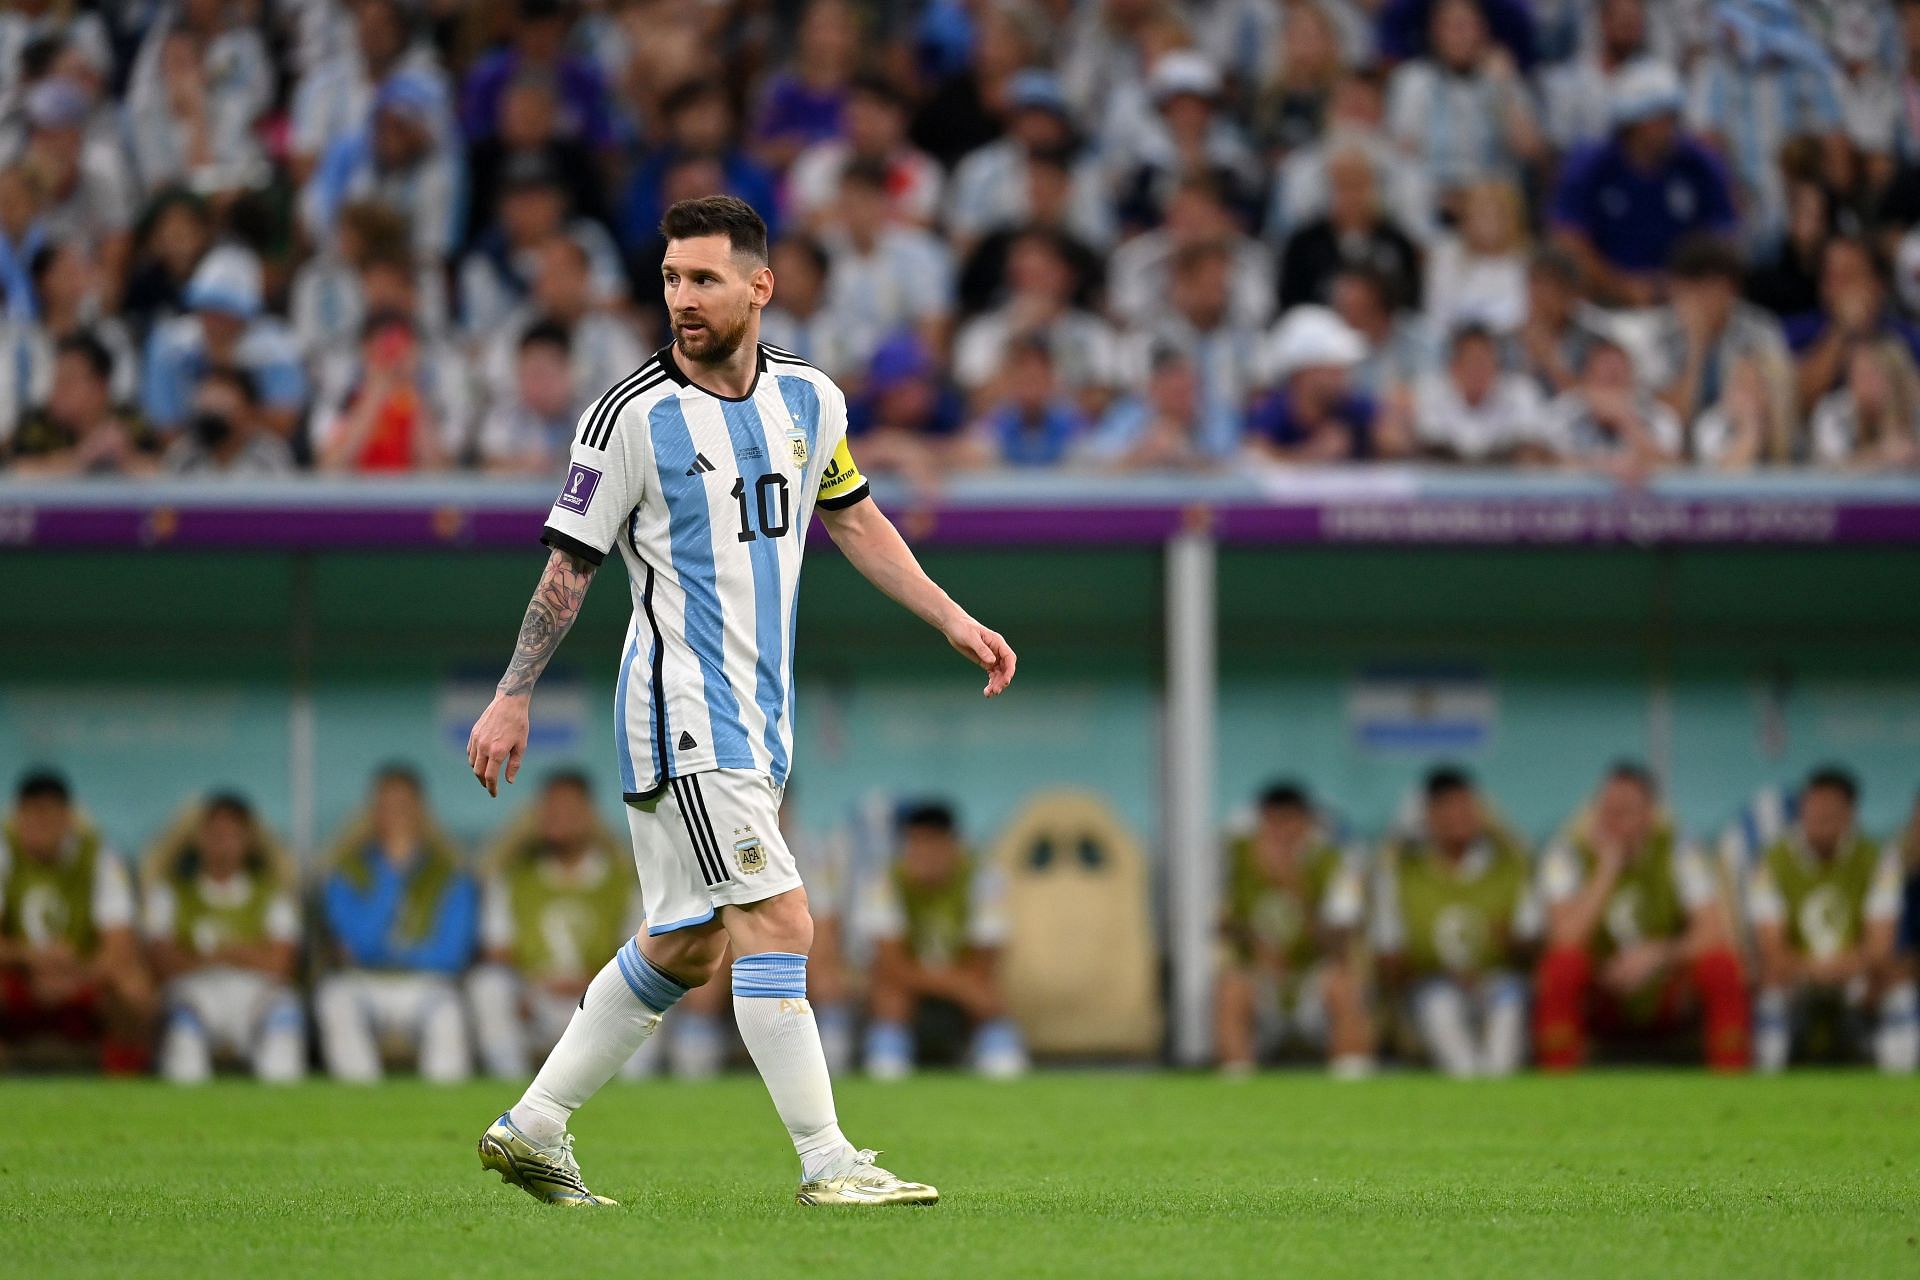 Lionel Messi has enjoyed a brilliant run at the 2022 FIFA World Cup.